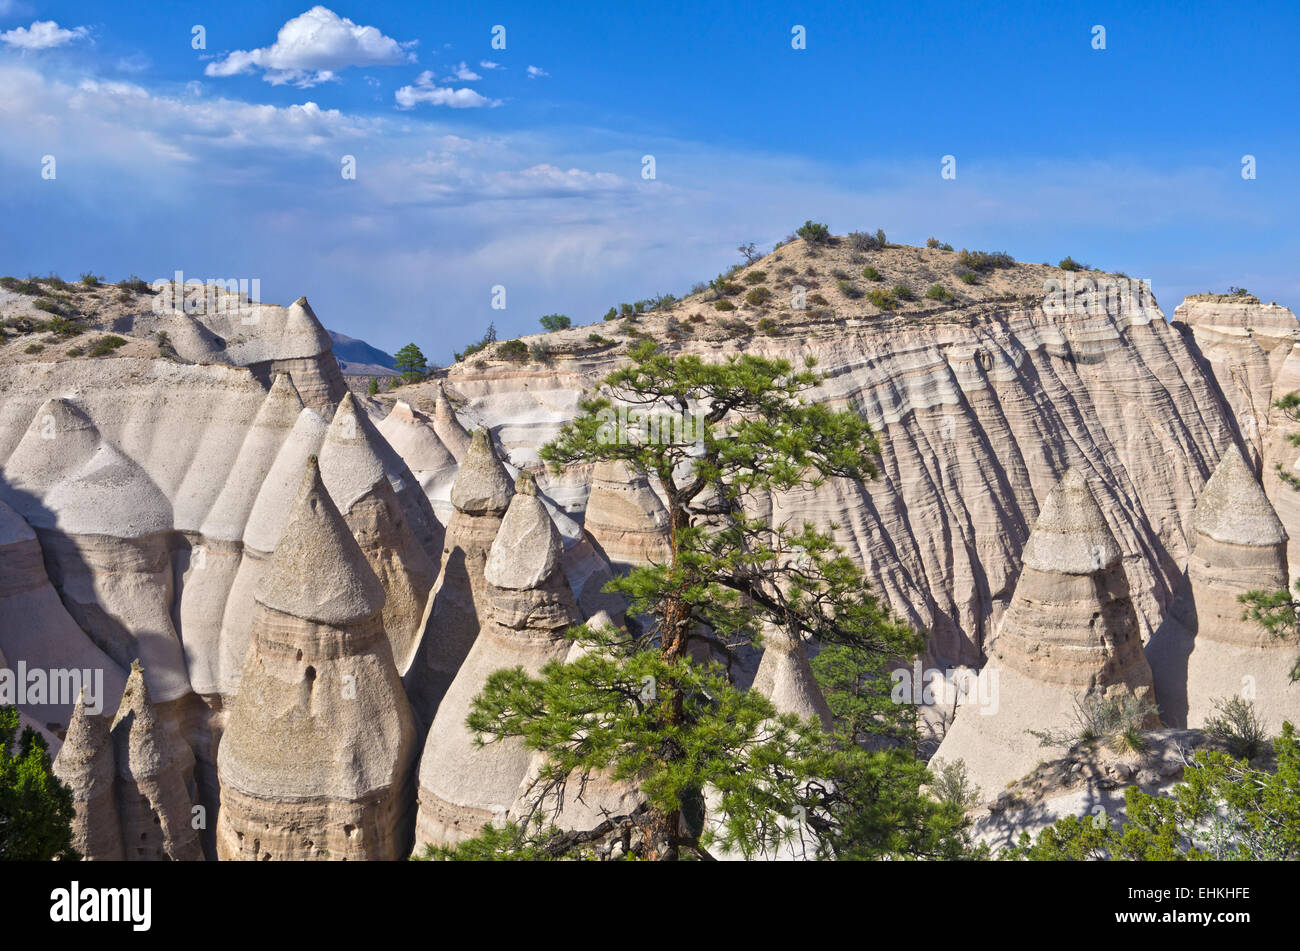 Kasha-Katuwe Tent Rocks National Monument in New Mexico.  A tree stands amid the hoodoos, beneath a blue sky. Stock Photo